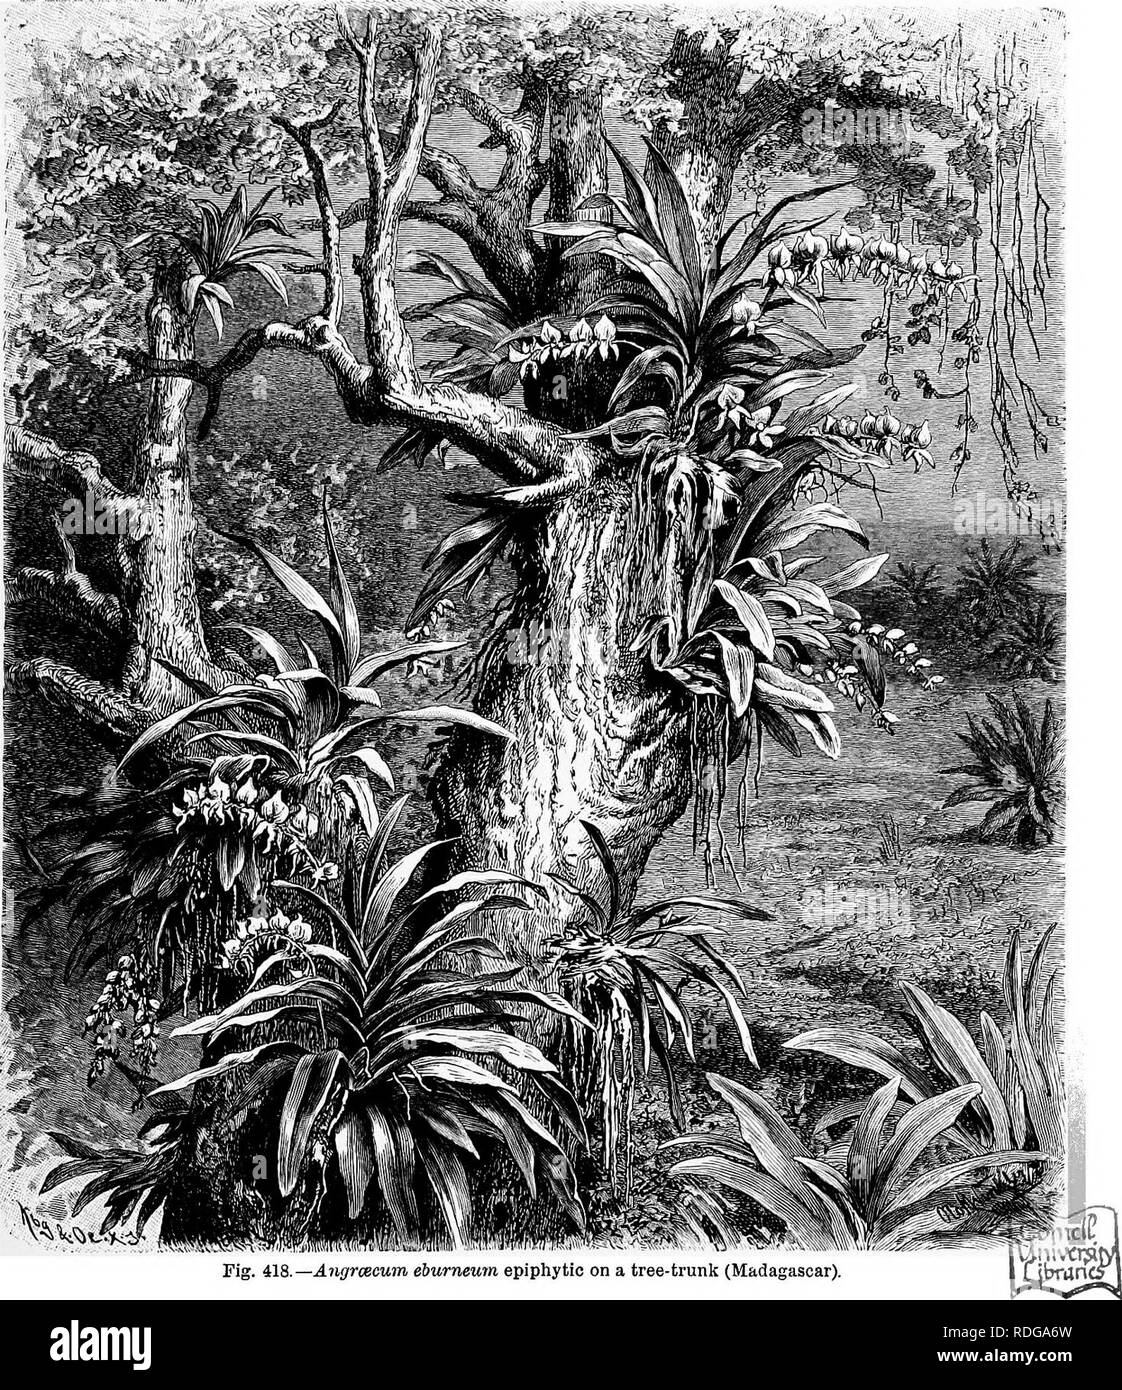 . The natural history of plants, their forms, growth, reproduction, and distribution;. Botany. ANGIOSPEEMyE, MONOCOTYLEDONES. 73r repetition is not needful here. The Monandrse may be divided into four tribes, the Ophrydece, Neottiece, Vandece, and EpidendrecB. The Ophrydece include most of the British and European Orchids, which are not. Fig 418 —Angrcecum ebumeum epiphytic on a tree trunk (Madagascar) epiphytes but terrestrial, with swollen tuberous roots, including Orchis, Ophrys,. Gymnadenia, Habenaria, and the South African Lisa. The NeottieoB also include some European forms, Cephalanther Stock Photo